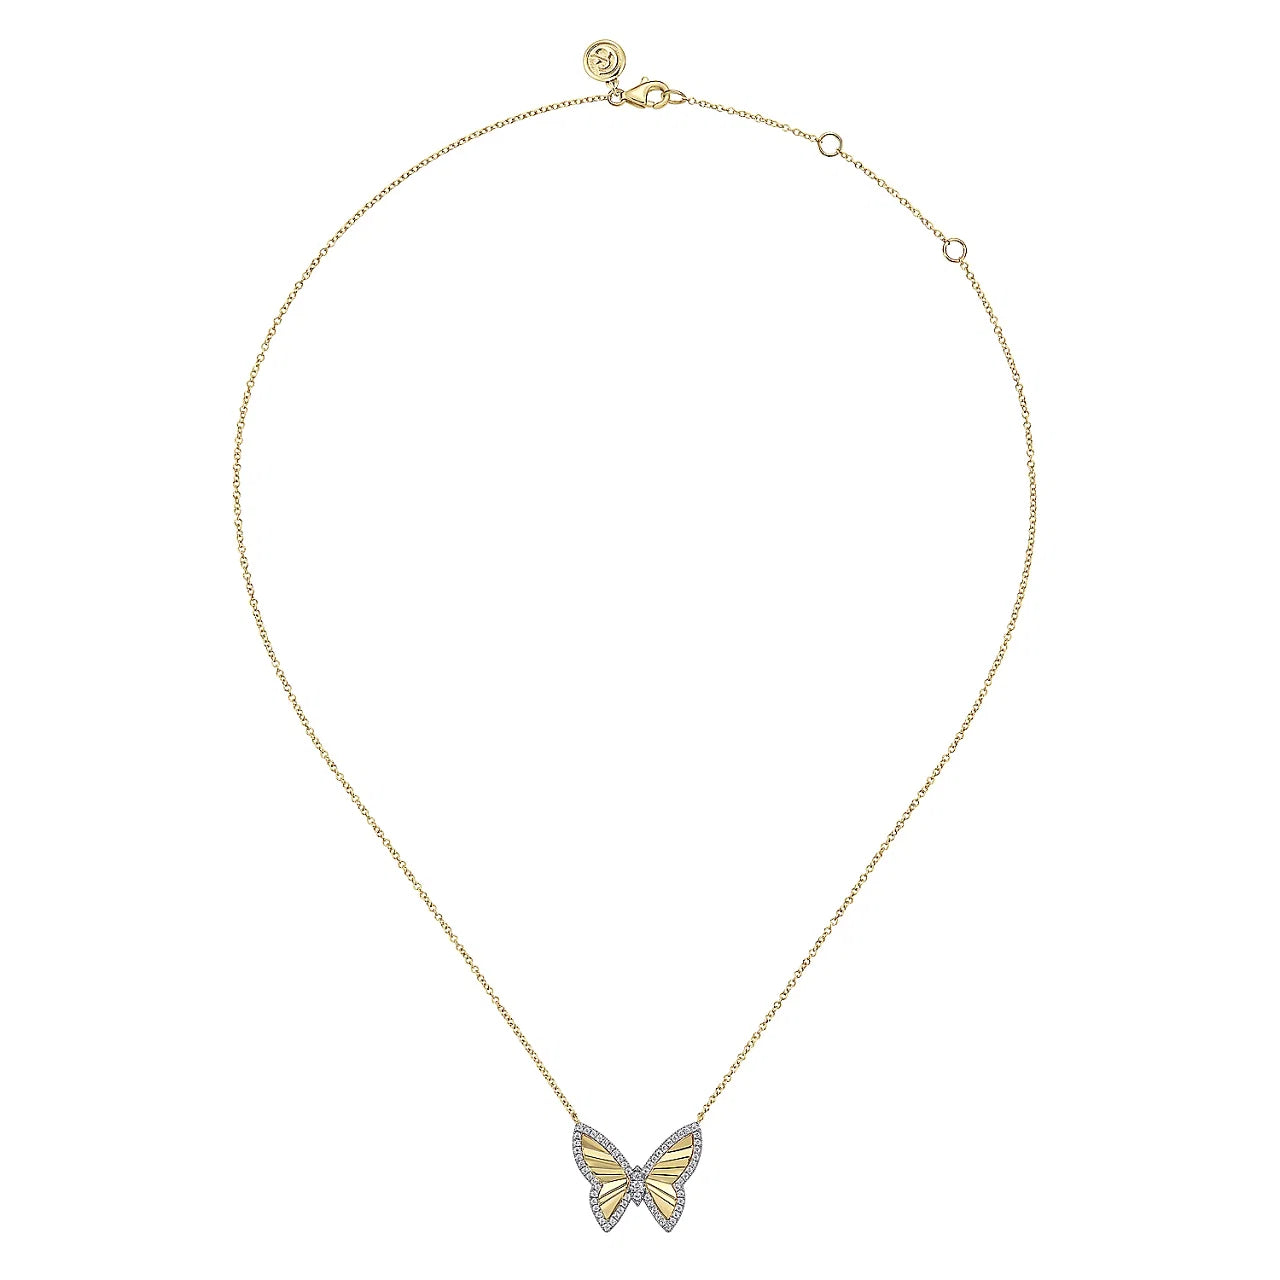 14K White and Yellow Gold Diamond Cut Butterfly Necklace